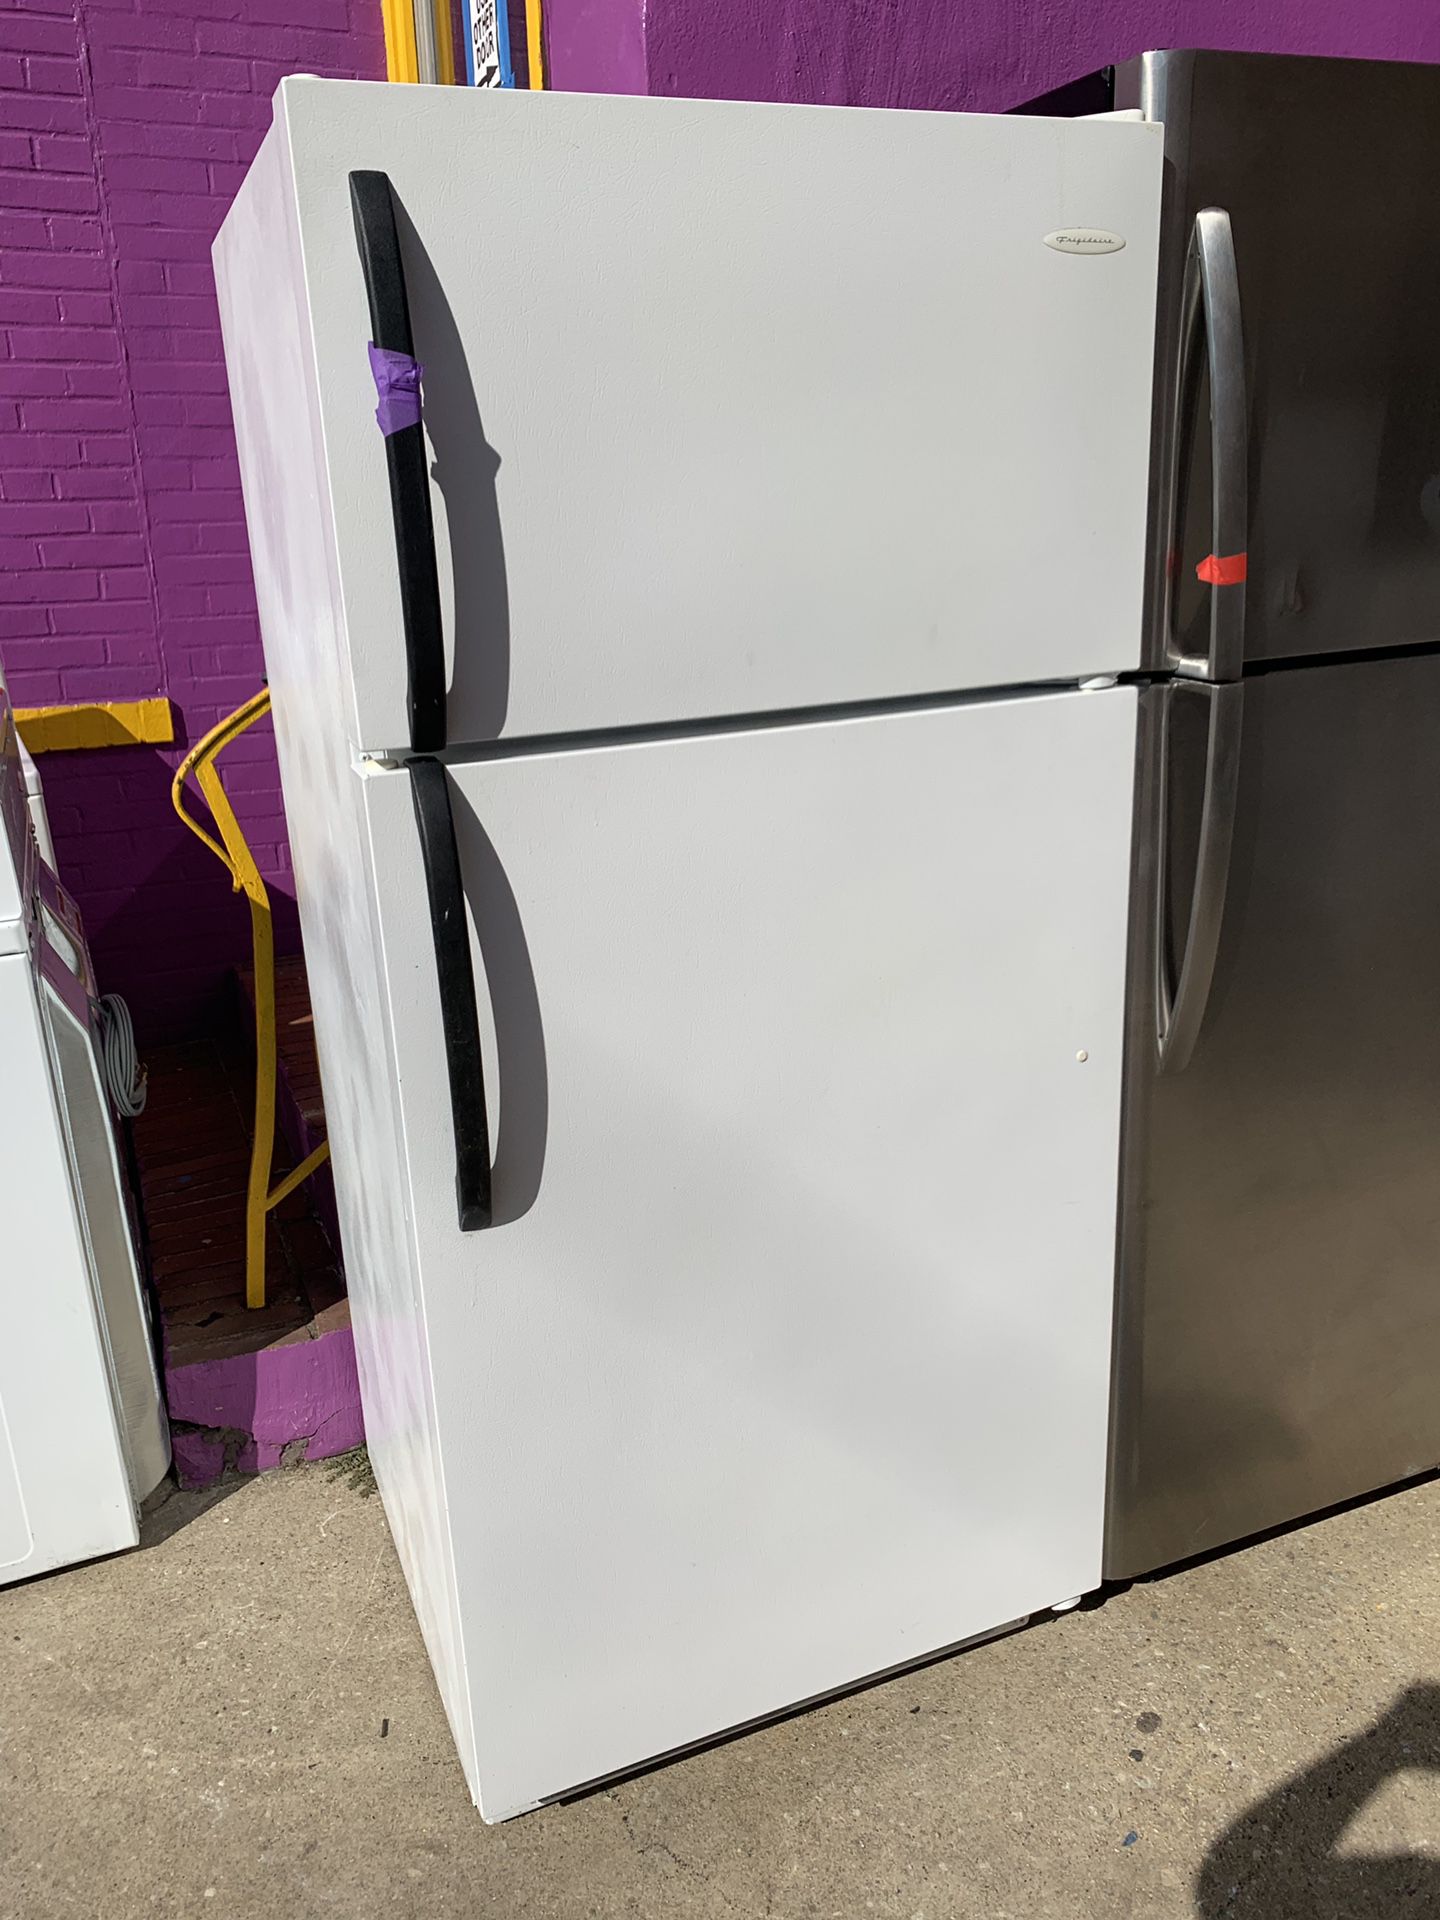 FRIGIDAIRE top freezer refrigerator working perfectly with 4 months warranty